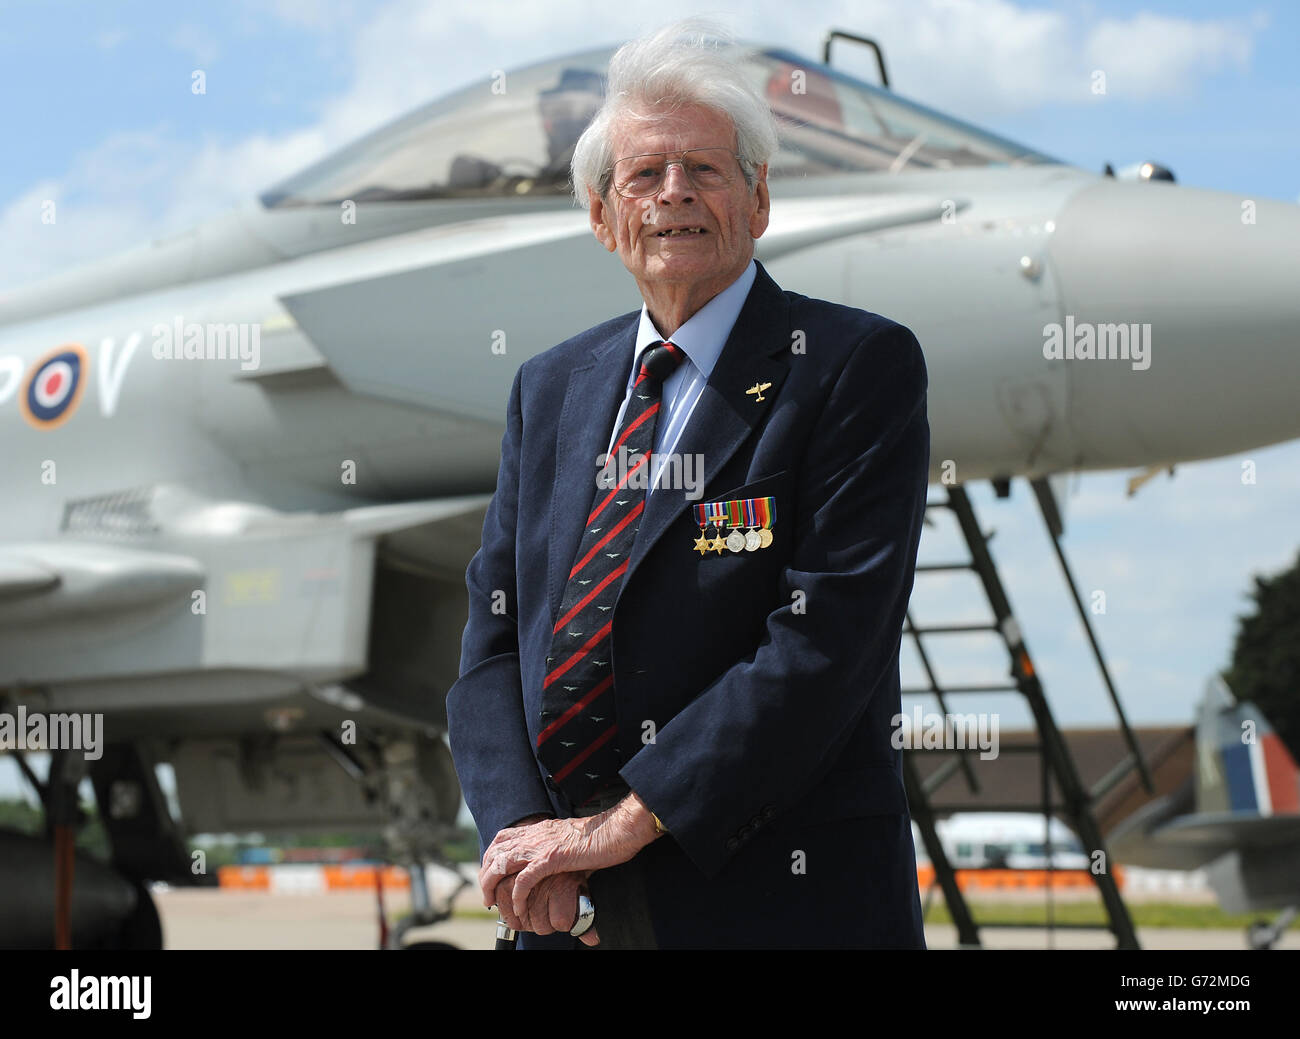 D-Day veteran Paddy Byrne at Coningsby to watch a Eurofighter Typhoon accompanied by a D-Day Spitfire perform a low-level fly past over RAF Coningsby adorned with commemorative D-Day stripes ahead of the 70th anniversary of the landings at RAF, Coningsby, Linconlshire. Stock Photo